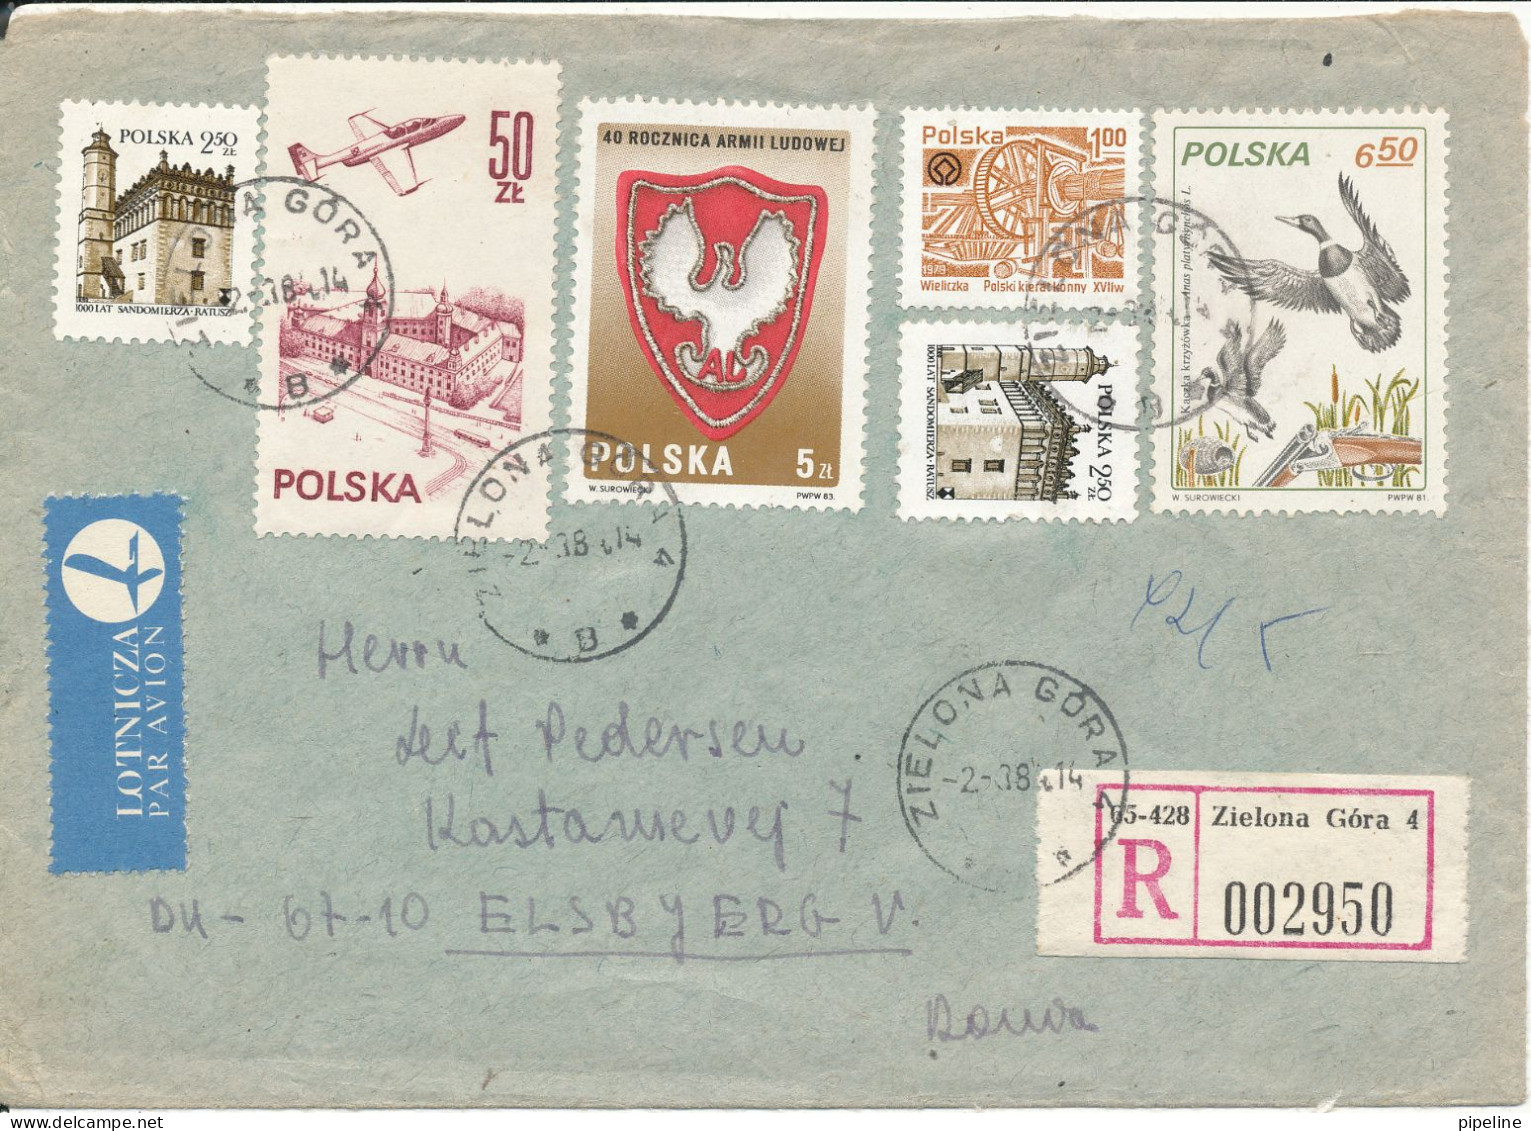 Poland Registered Cover Sent To Denmark Zielona Gora 2-3-1984 With More Topic Stamps - Covers & Documents